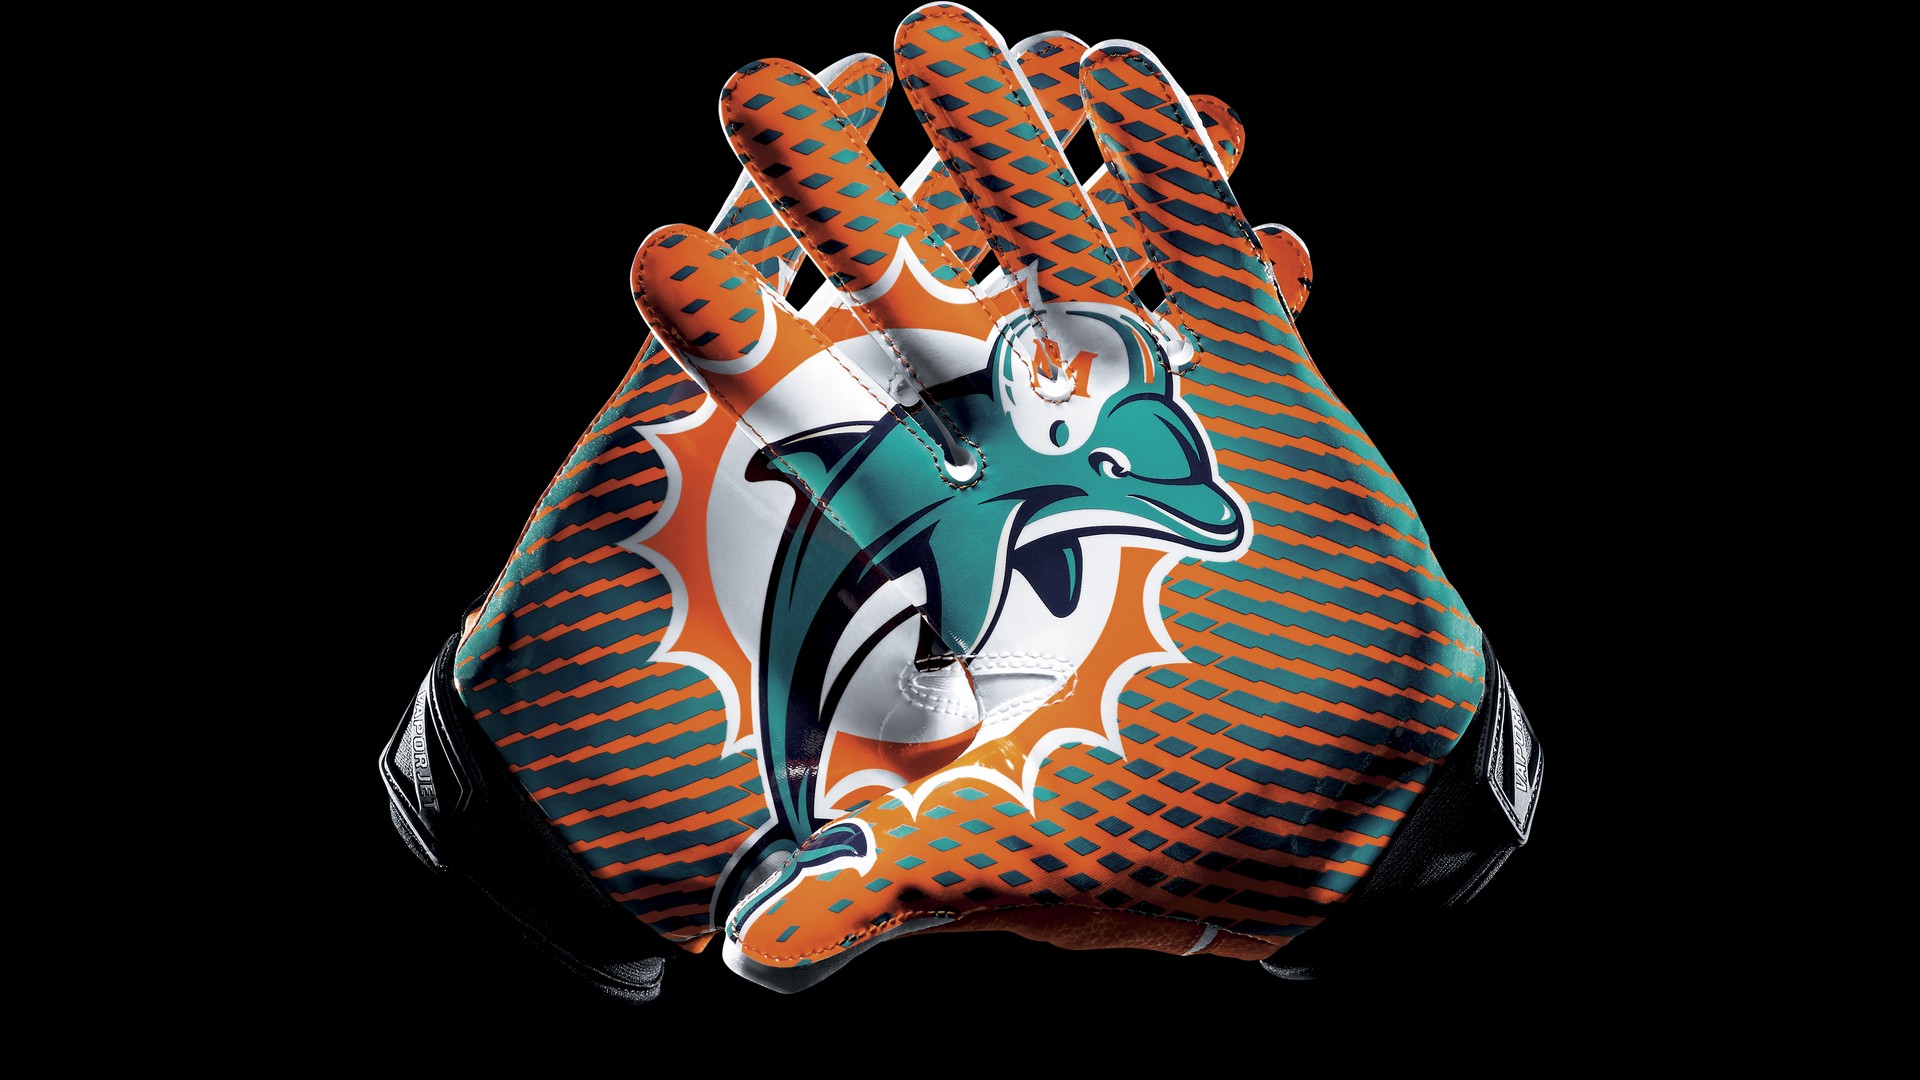 Wallpapers Miami Dolphins with resolution 1920x1080 pixel. You can make this wallpaper for your Mac or Windows Desktop Background, iPhone, Android or Tablet and another Smartphone device